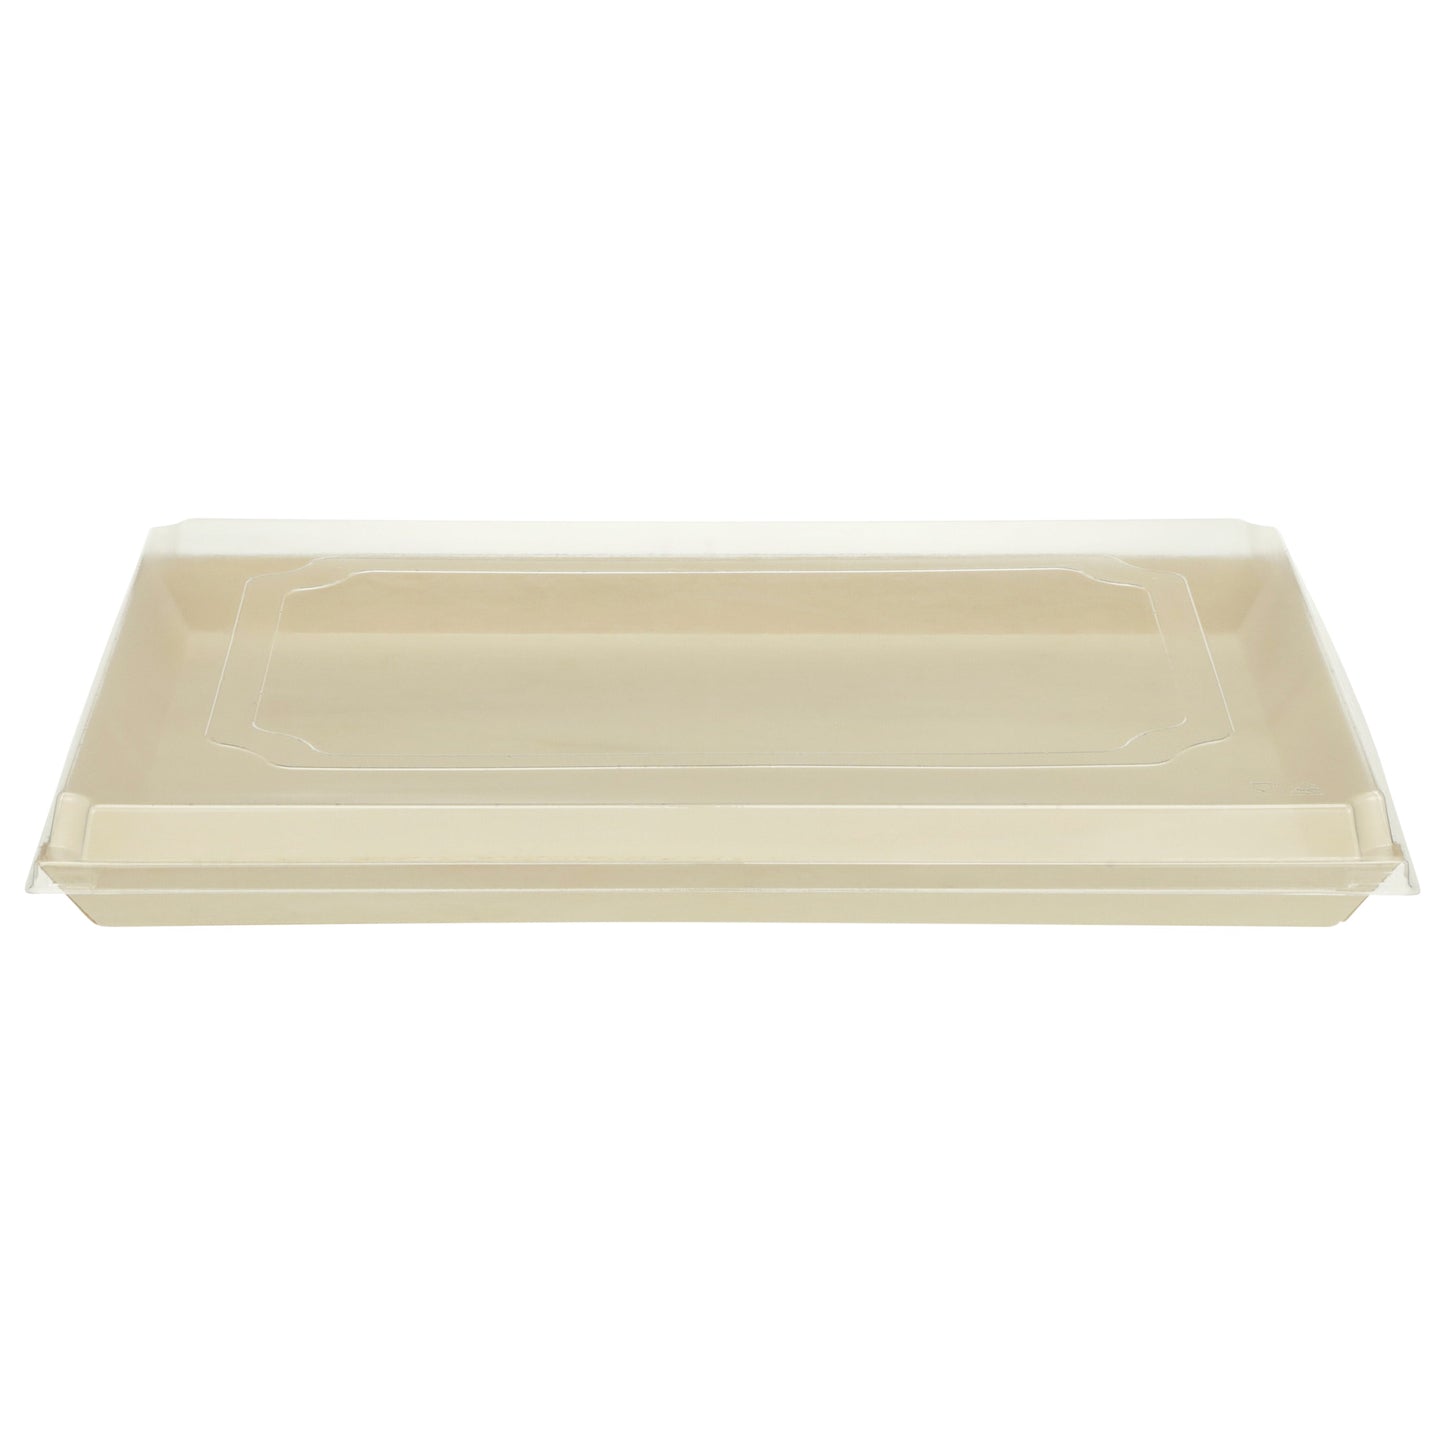 11.8" X 15" X 1" Covered Tray Set | Compostable Balsa Tray with RPET Lid | 50 of each (Case of 50)